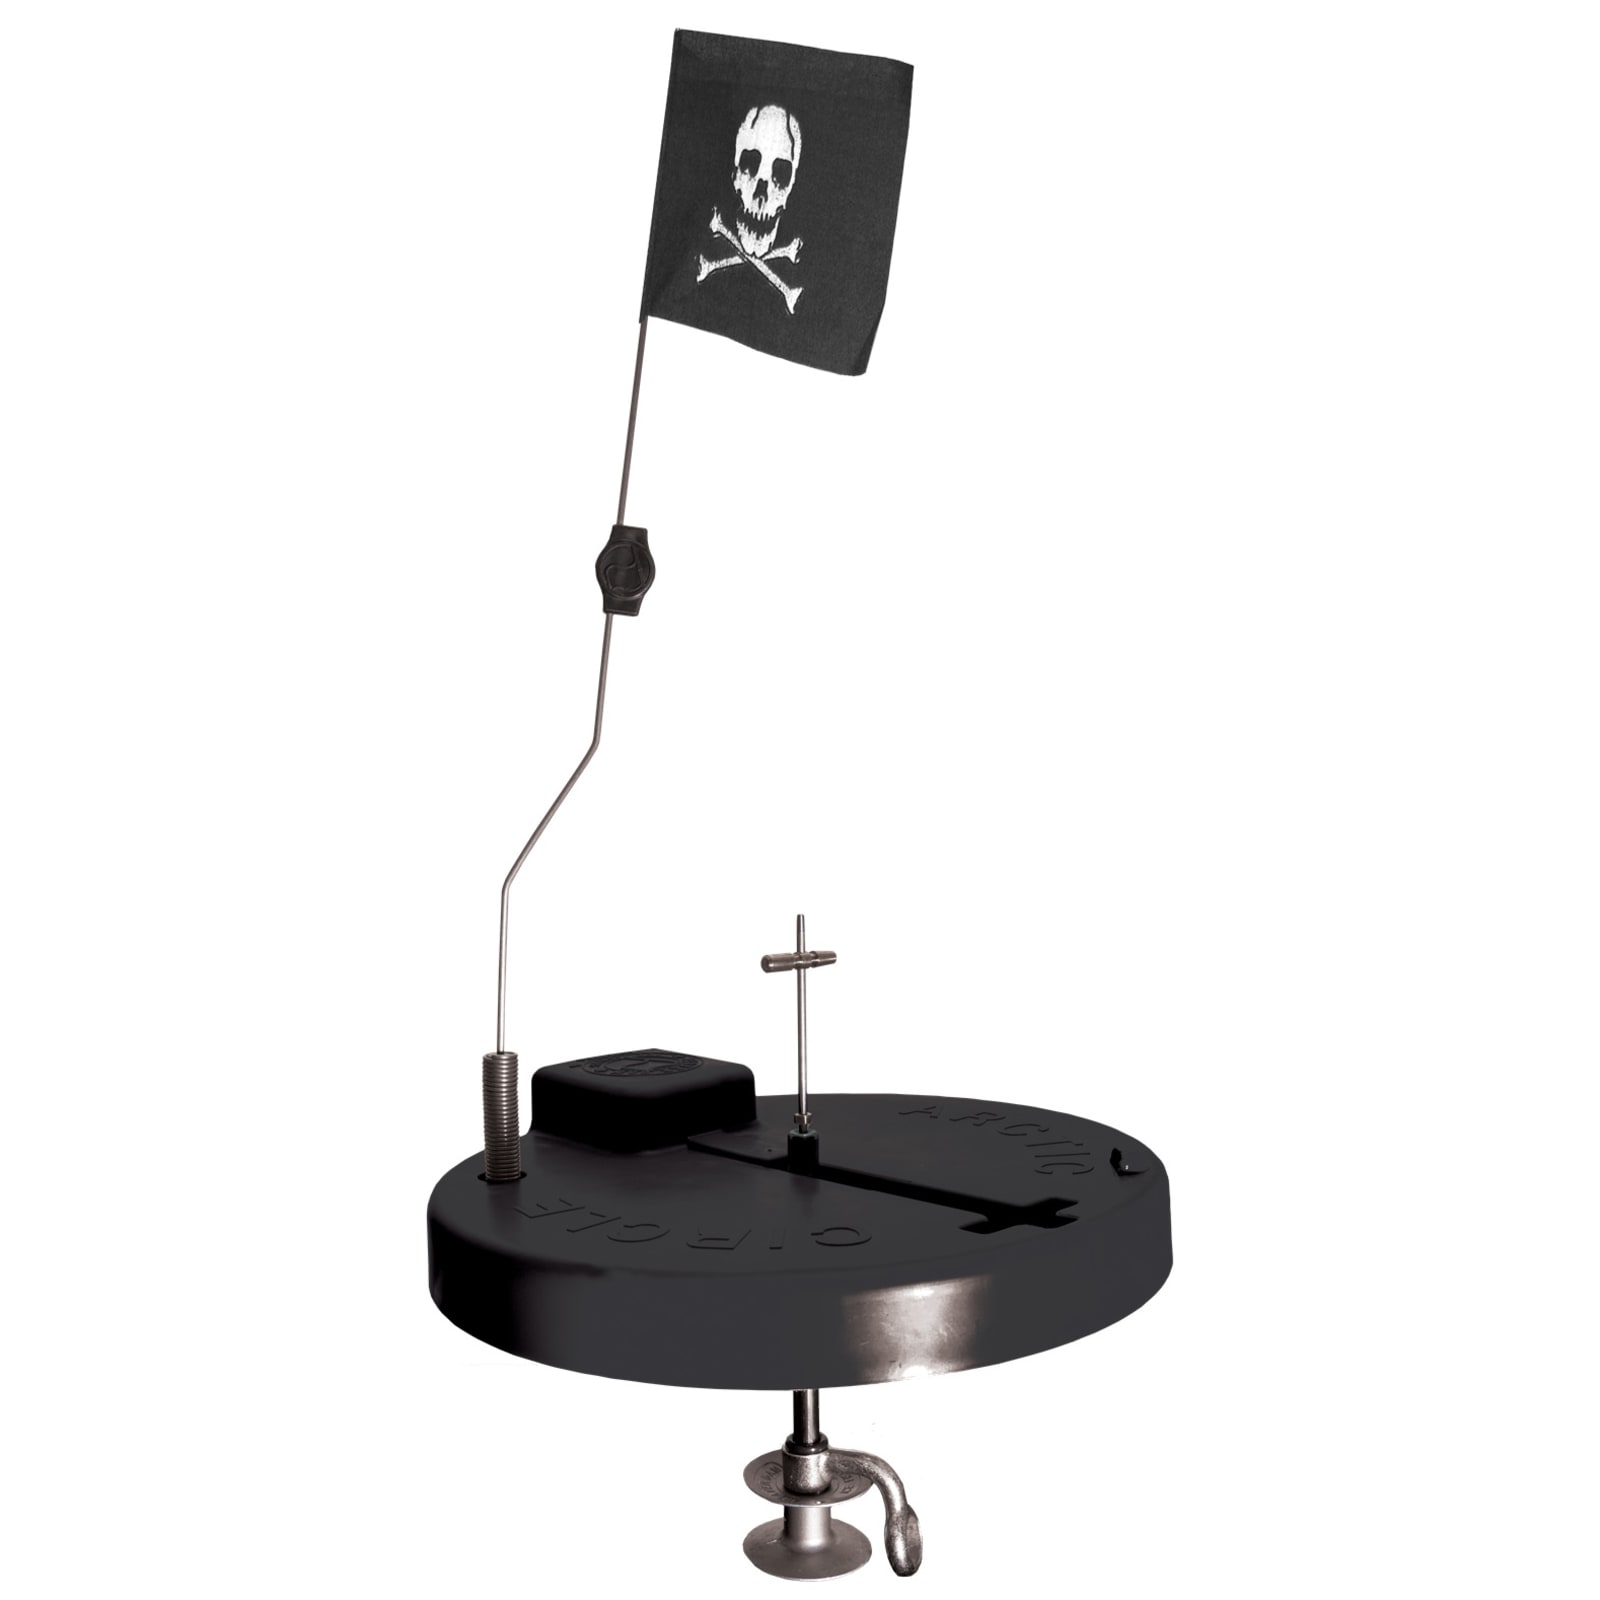 10 in. Round Tip-Up Jolly Roger by Beaver Dam Ice Fishing at Fleet